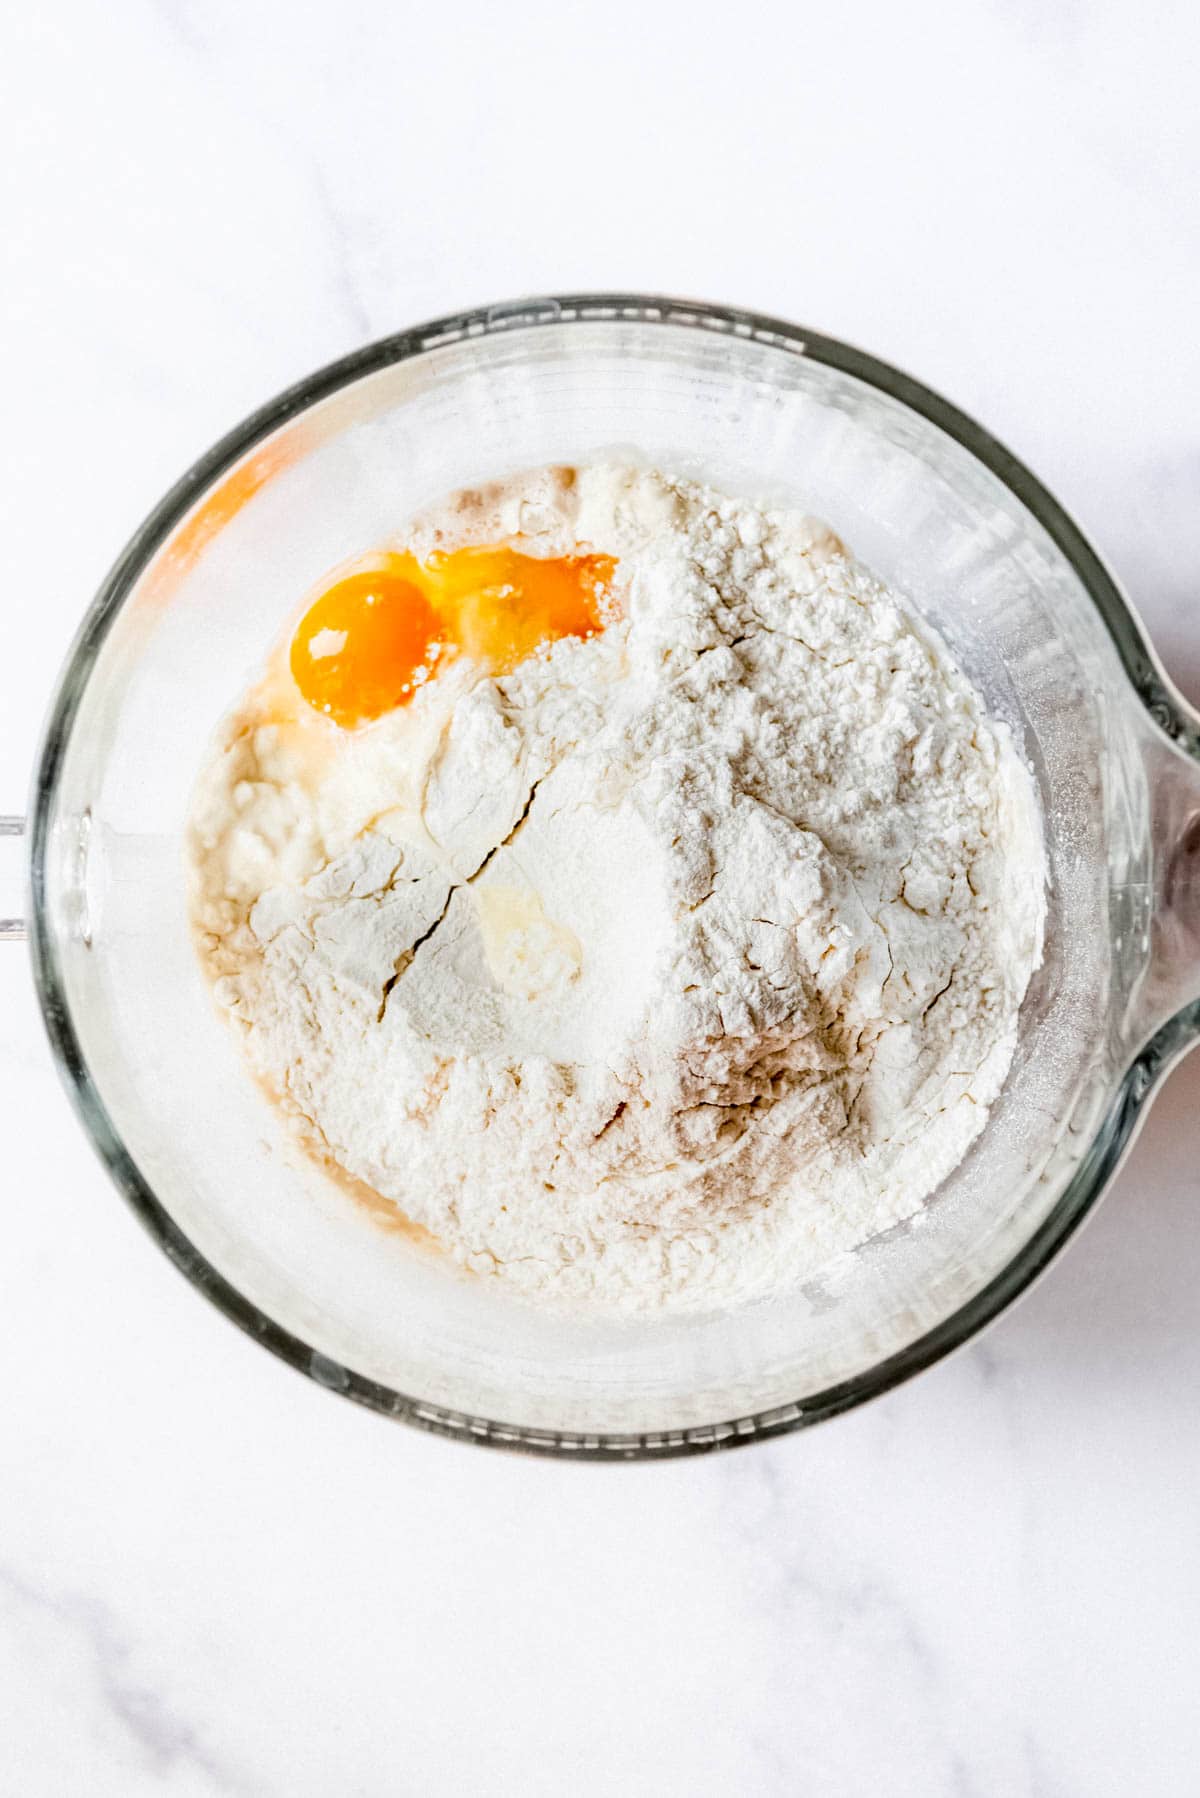 Adding flour and egg yolks to proofed yeast in a glass mixing bowl.